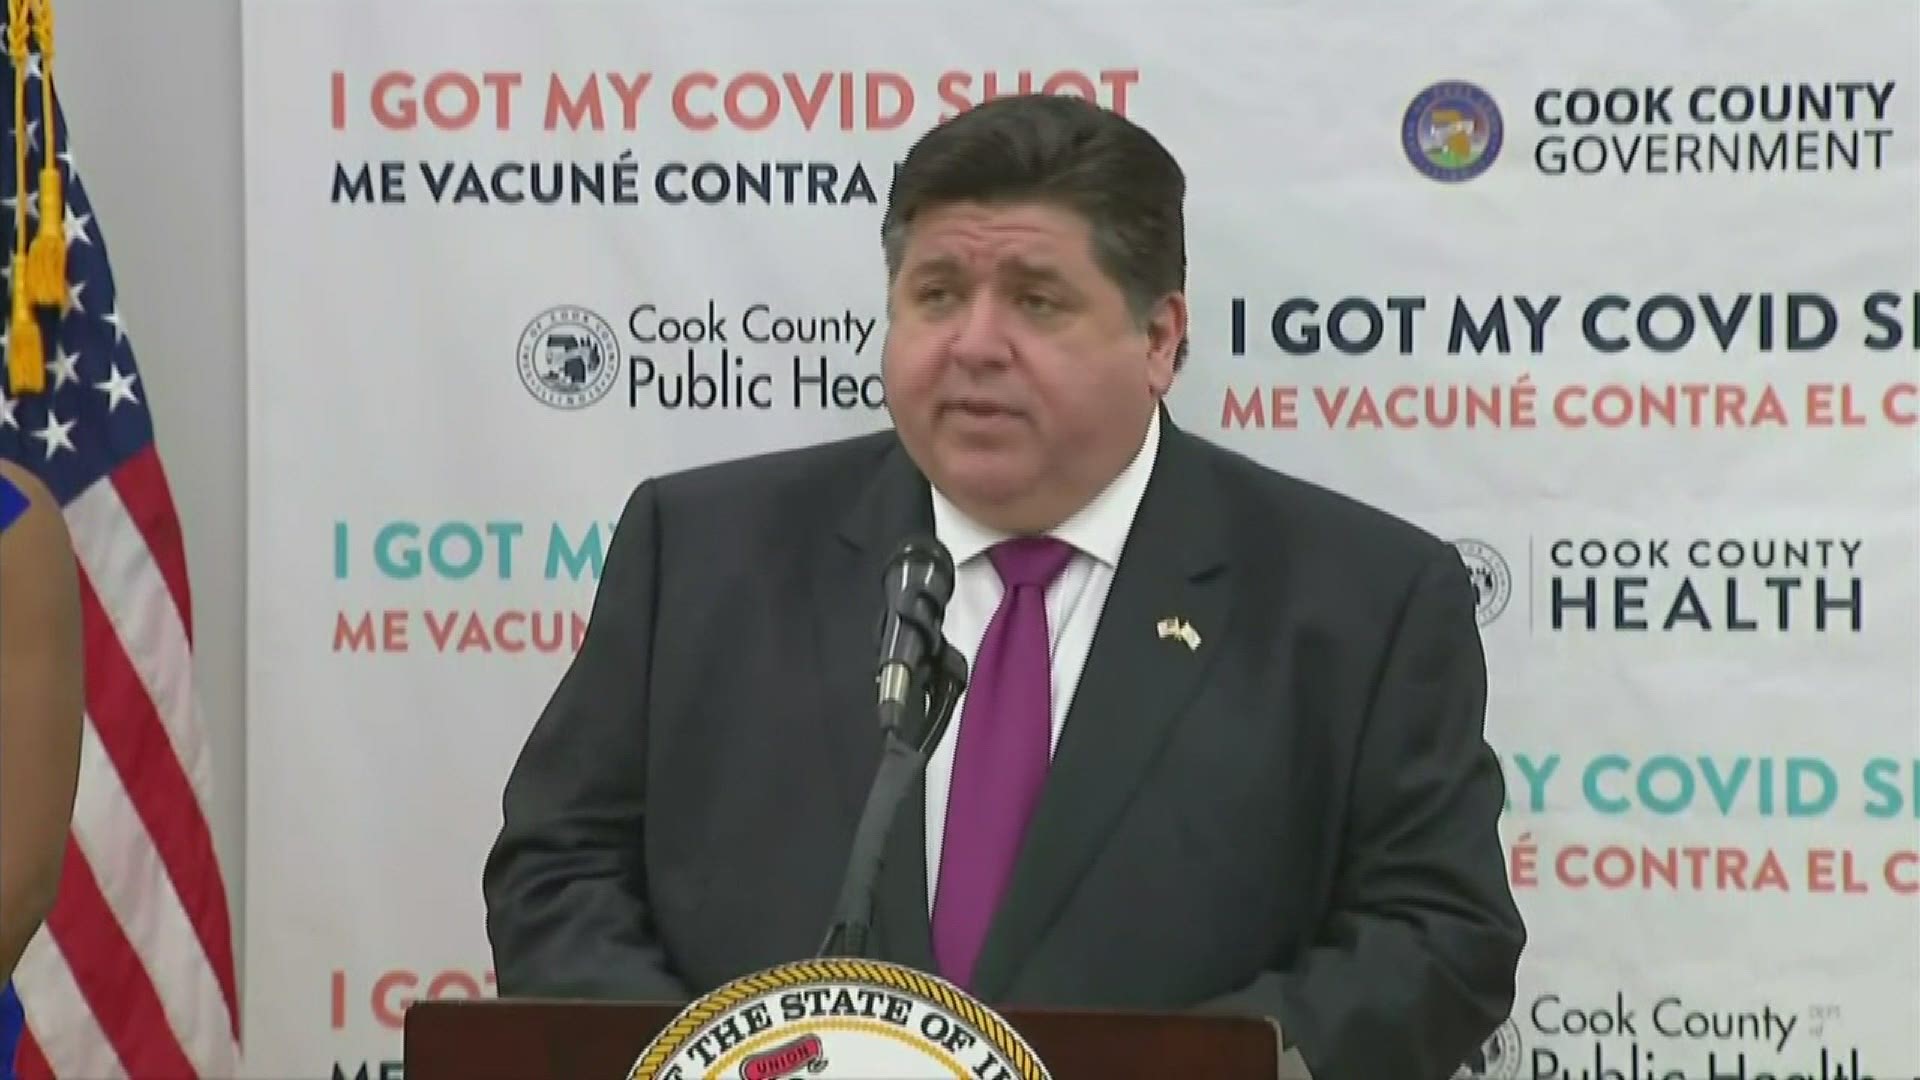 Pritzker said the state has administered 6.7 million vaccine doses meaning 73% of seniors and 42% of those 16-years-old and above have received at least one vaccine.